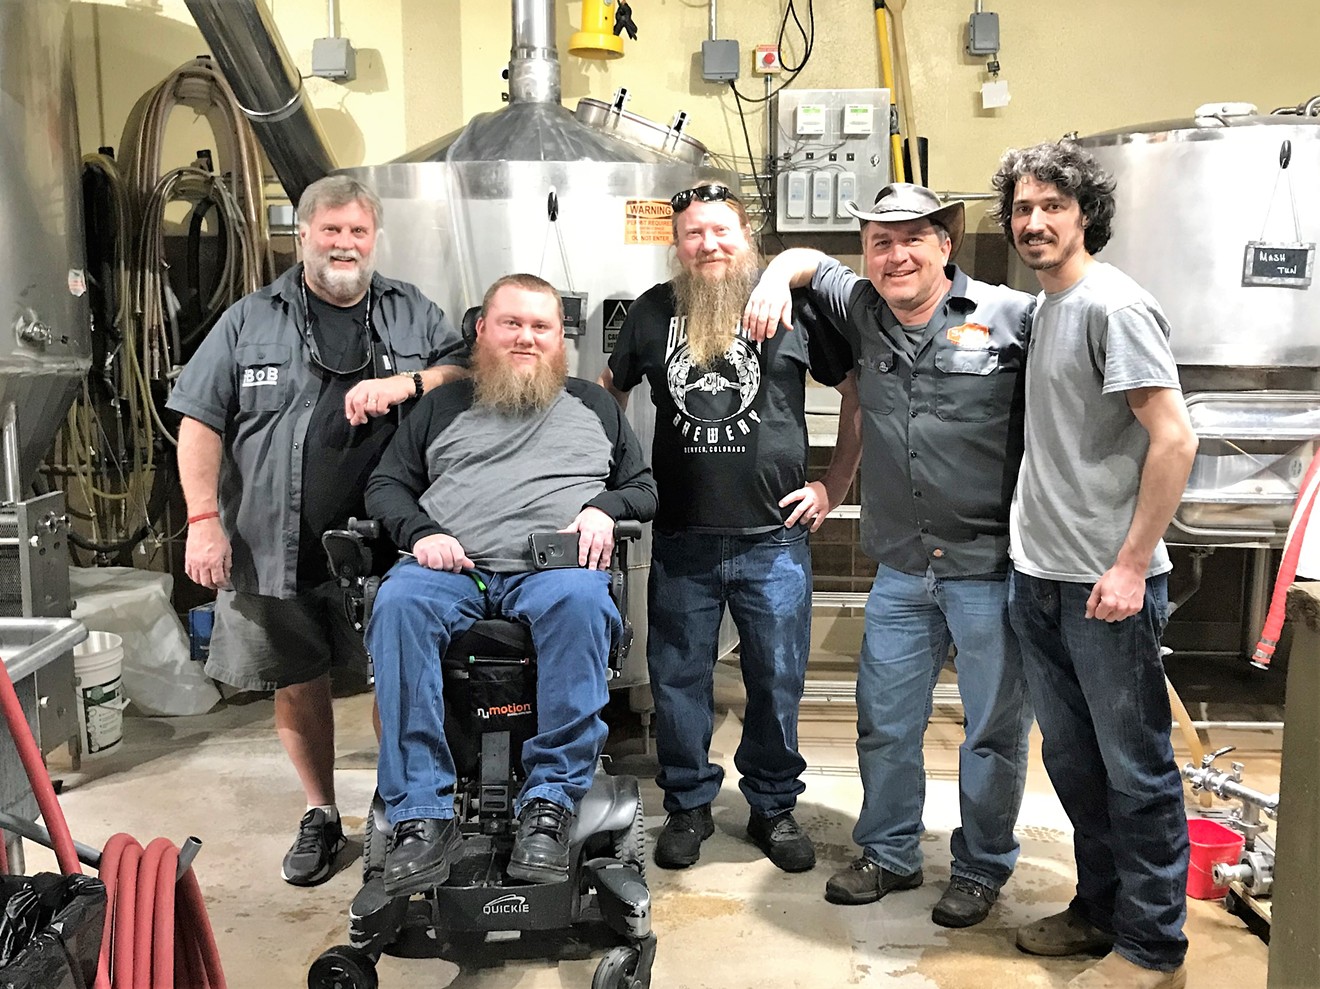 The One Barrel Wednesday team (from left): Paul Webster, Zack Christofferson, Harry Smith, Tim Myers and Kin Schotters.